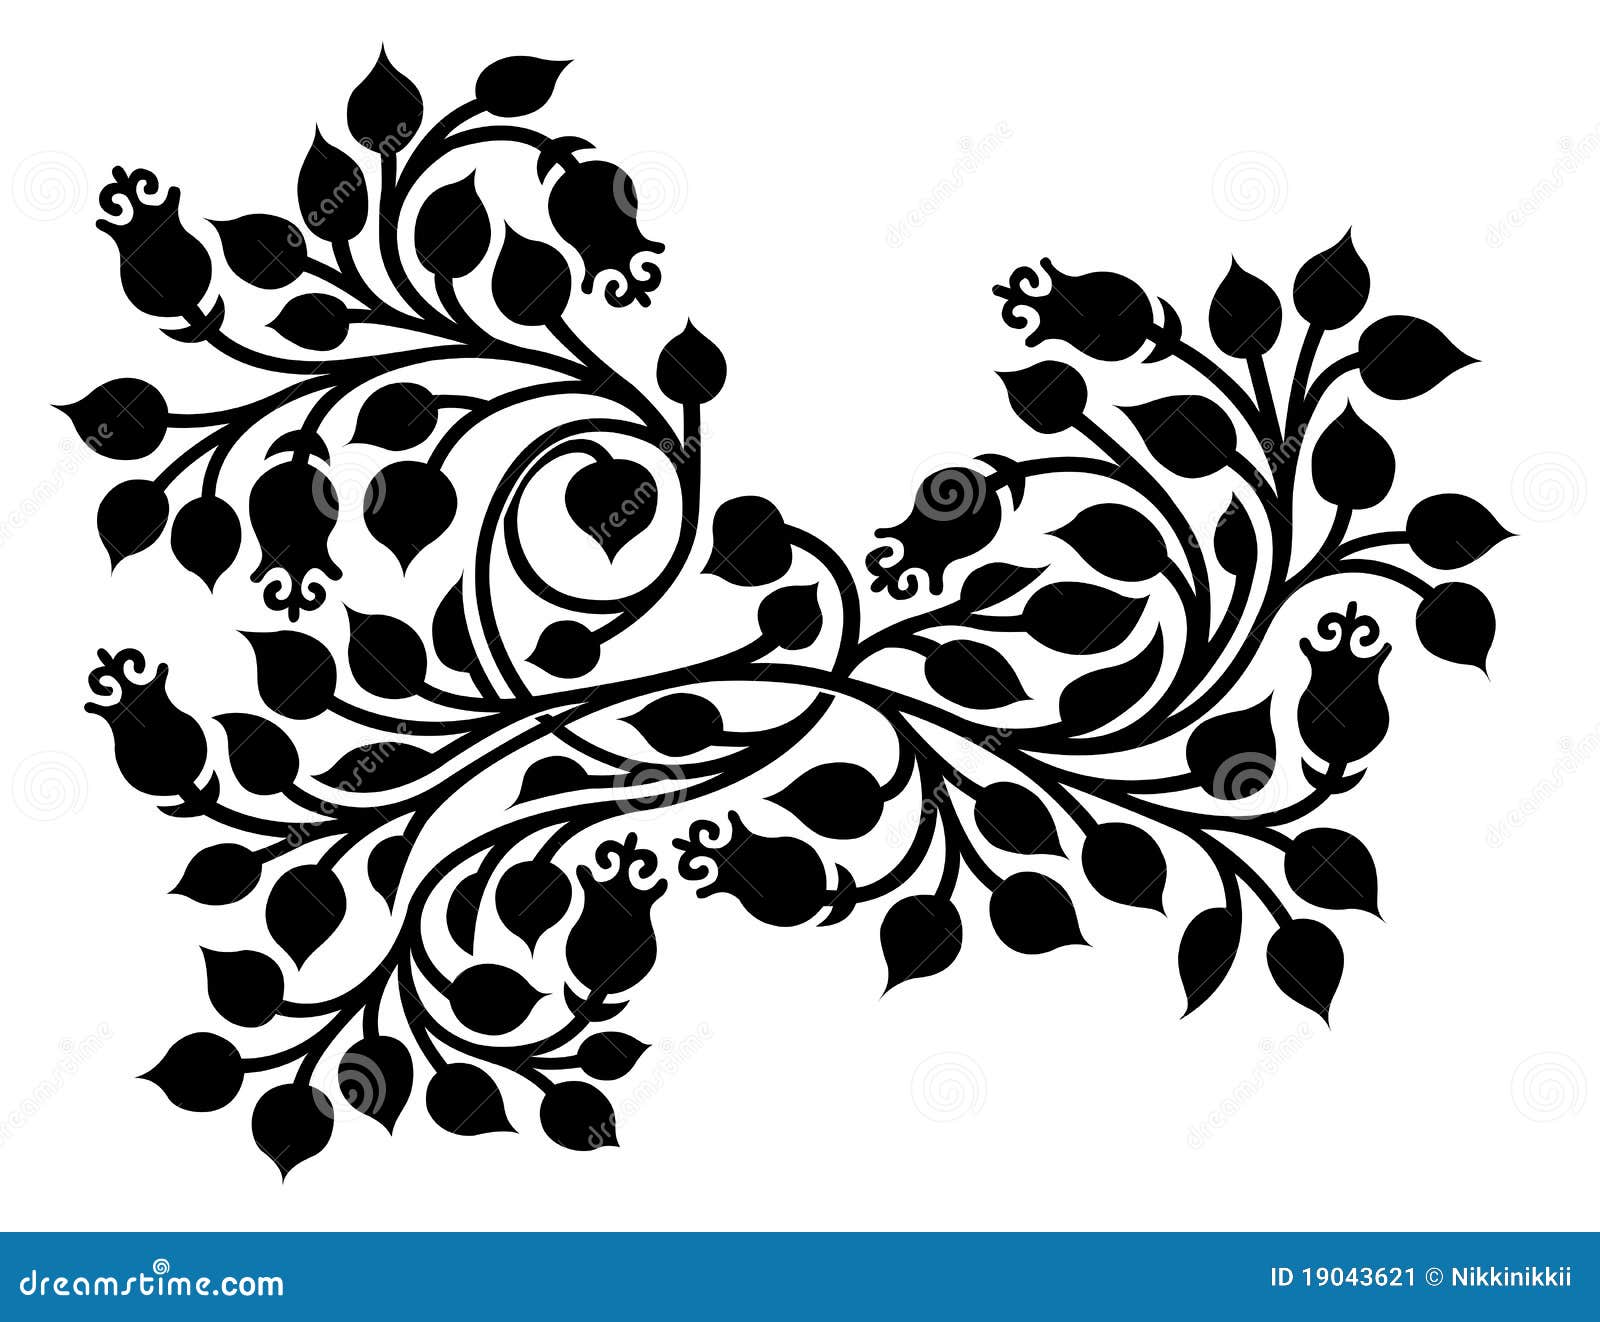 ornate foliage with leaf and flower tracery